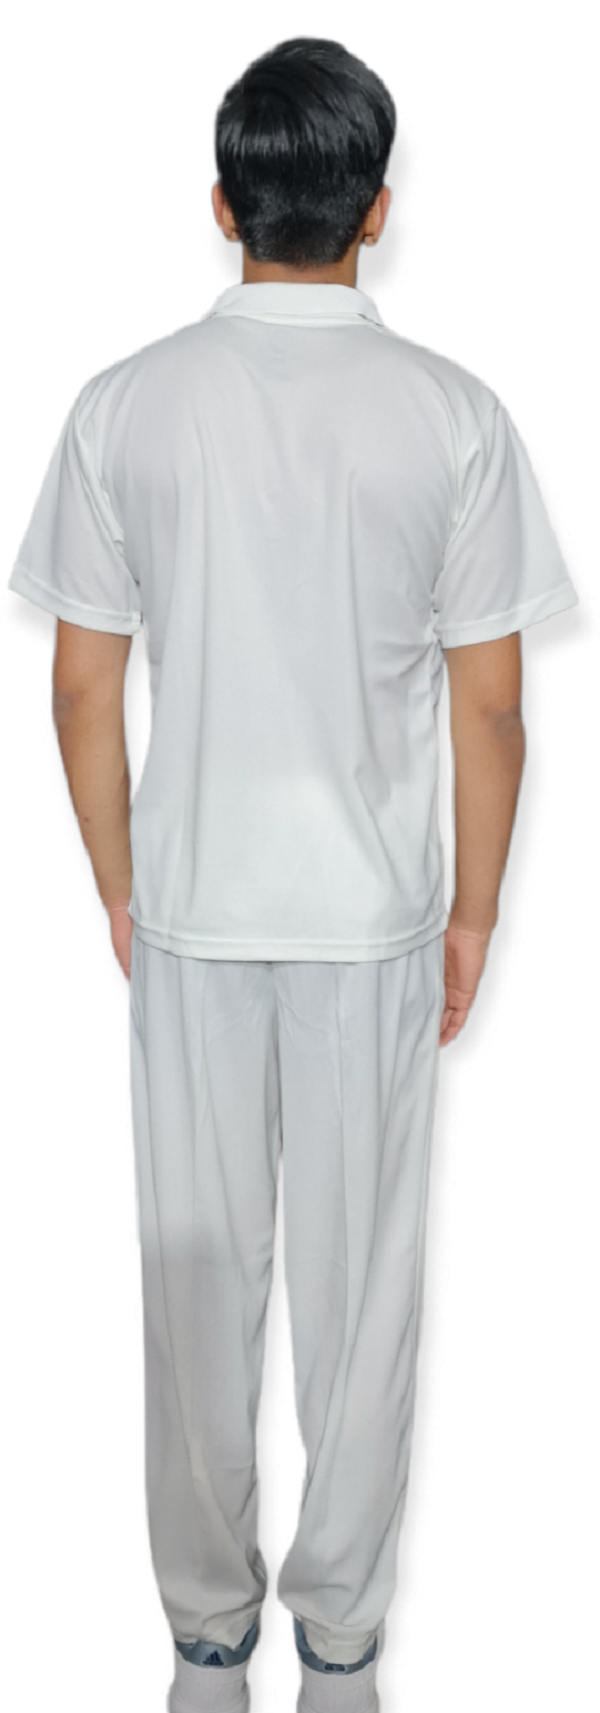 Cricket Outfit/kit